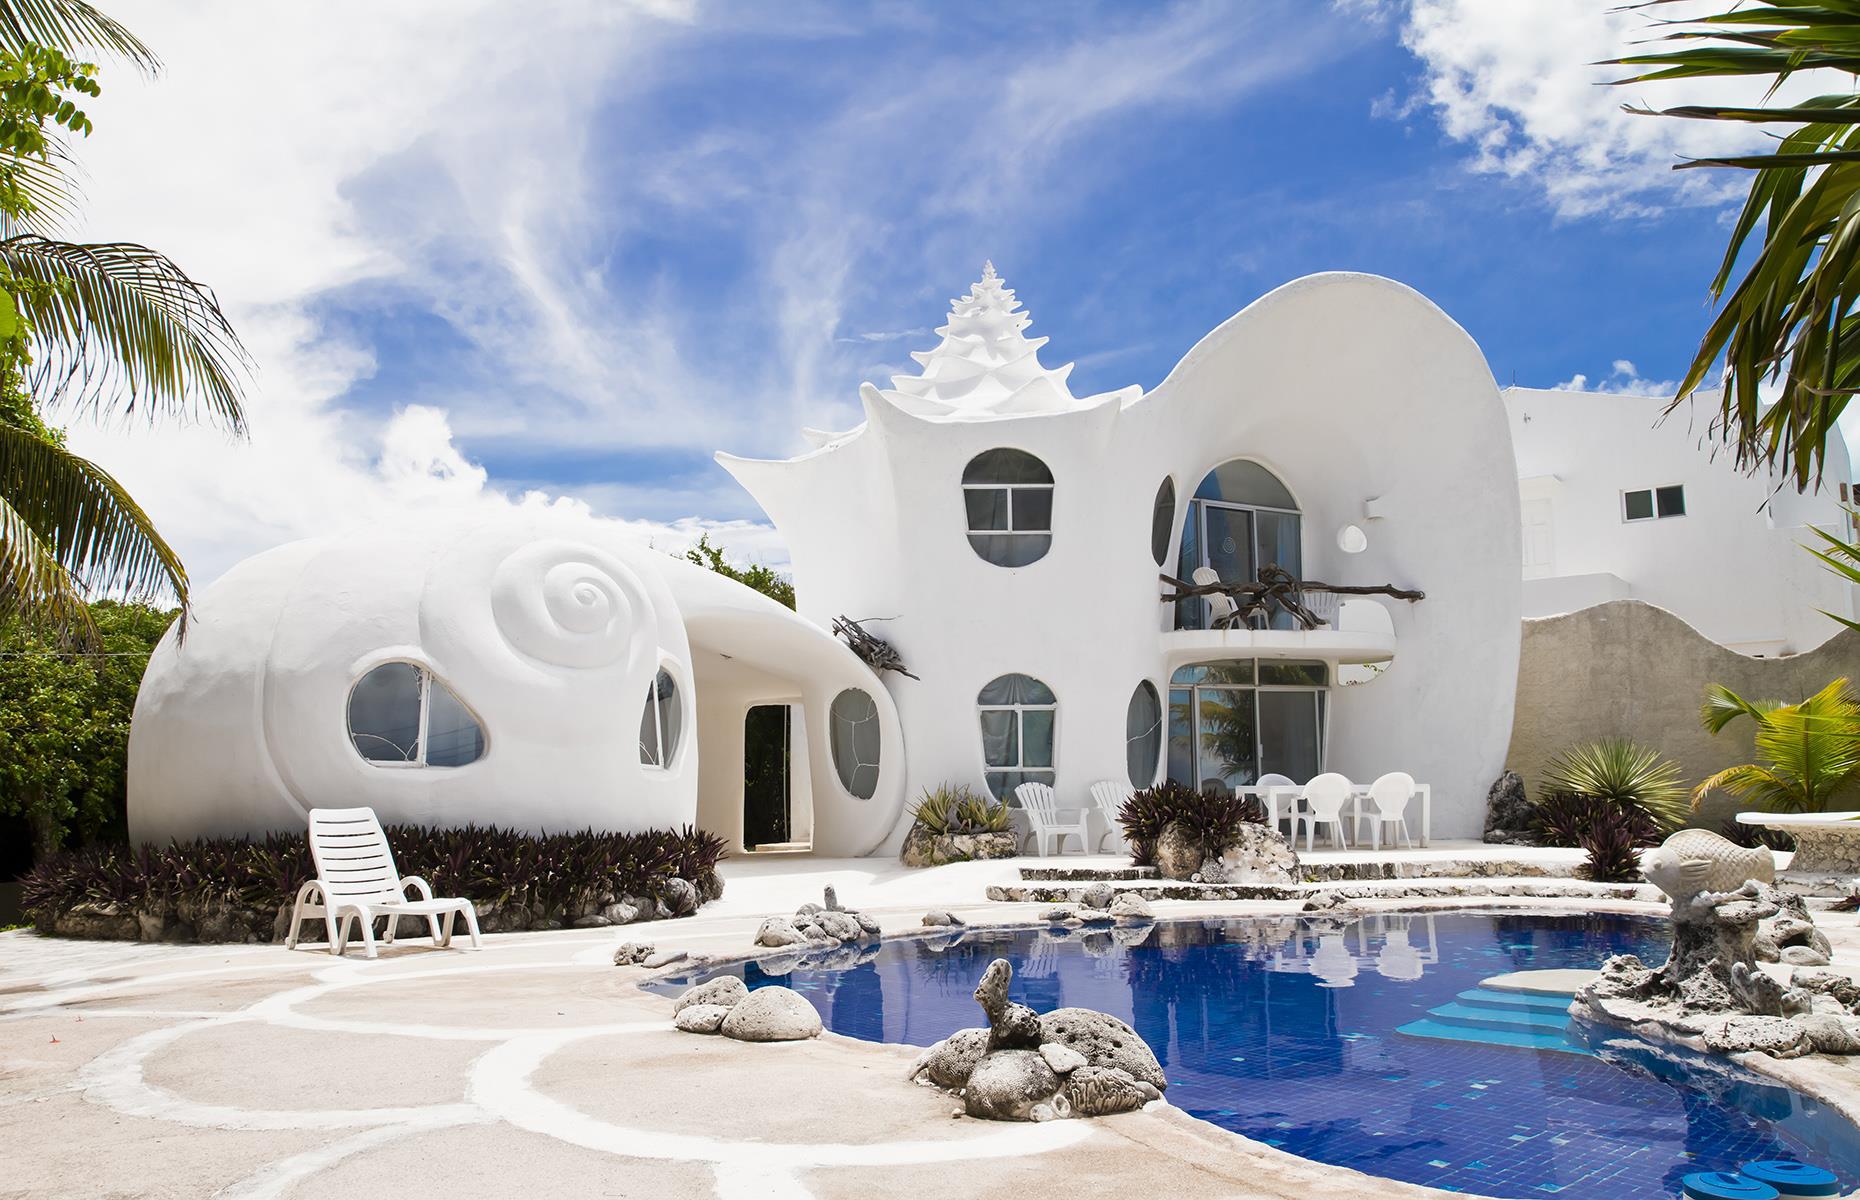 <p>Sleeping inside a seashell on Isla Mujeres, just off the coast of Cancún couldn't be any closer to a storybook experience. It isn’t just <a href="https://www.airbnb.co.uk/rooms/530250">The Seashell House's</a> whitewashed exterior that follows the shell theme – inside, there are shell-encrusted mirrors, sinks and bathrooms. The shower water even sprinkles out from a shell. Outside, there’s a private pool or you can hop into a golf buggy for a 15-minute drive to the beach.</p>